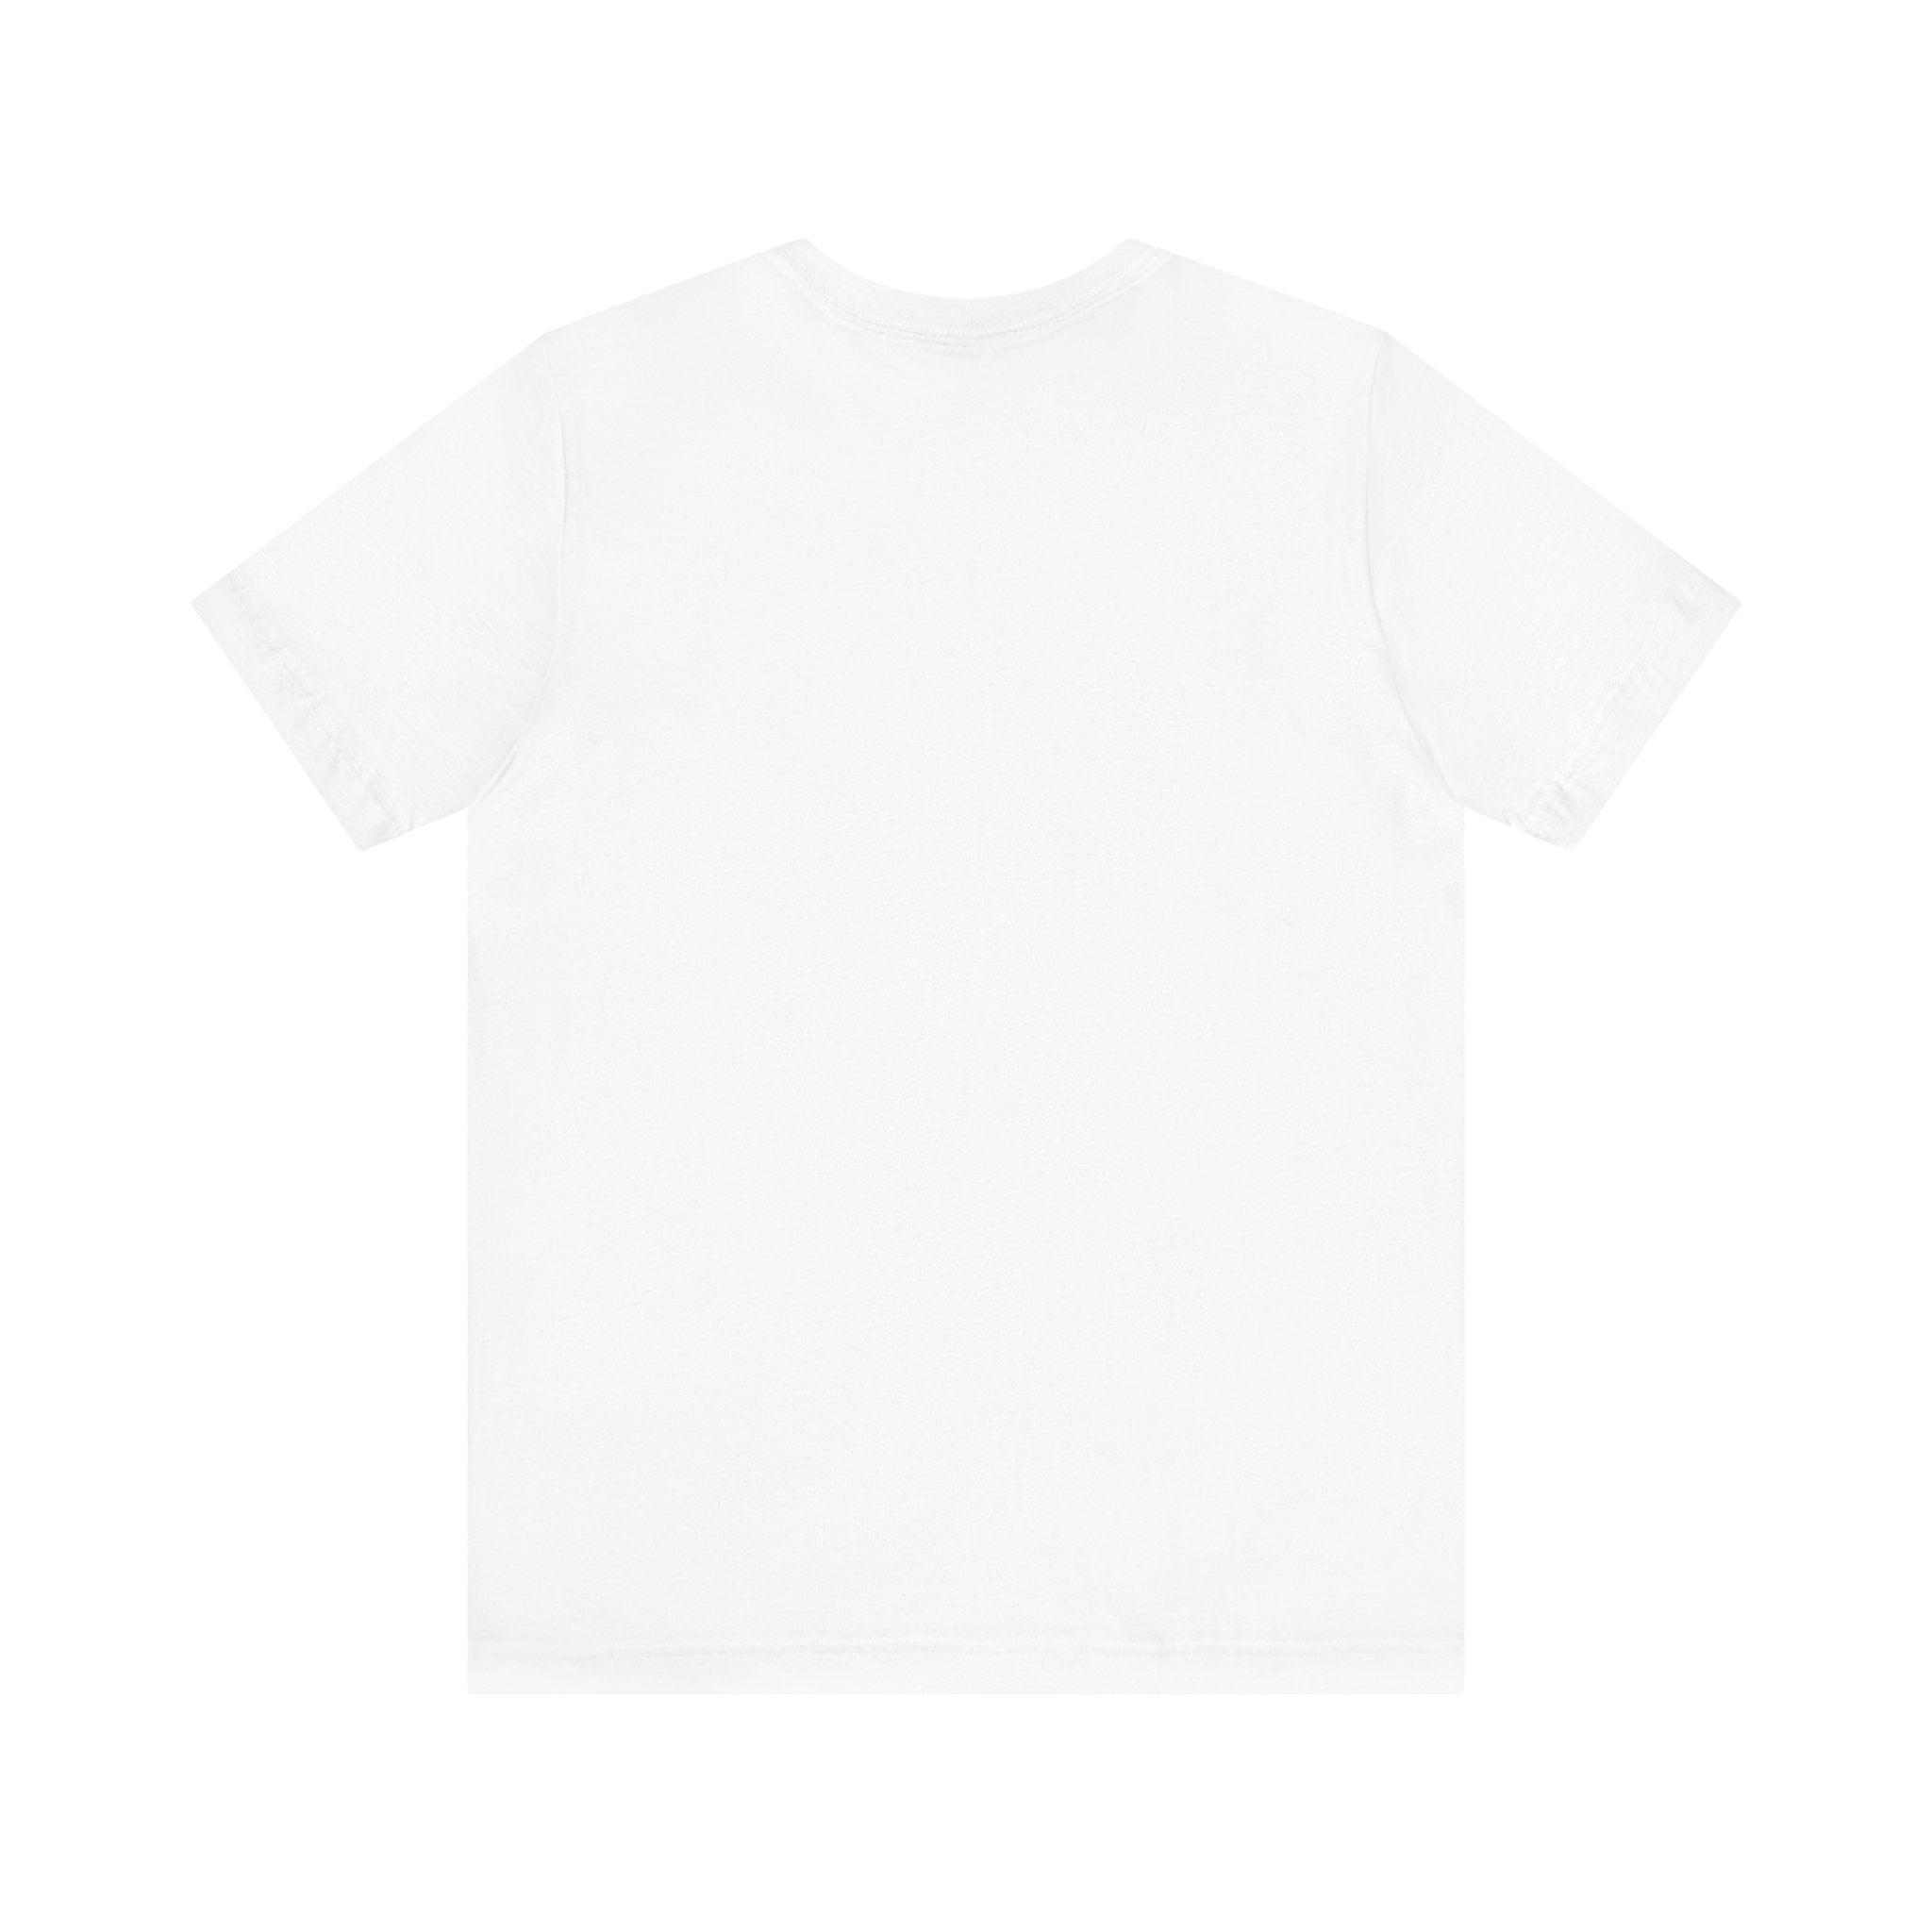 Middle Finger FU Shh Silent Protest Emoji Tee (Small Graphic)